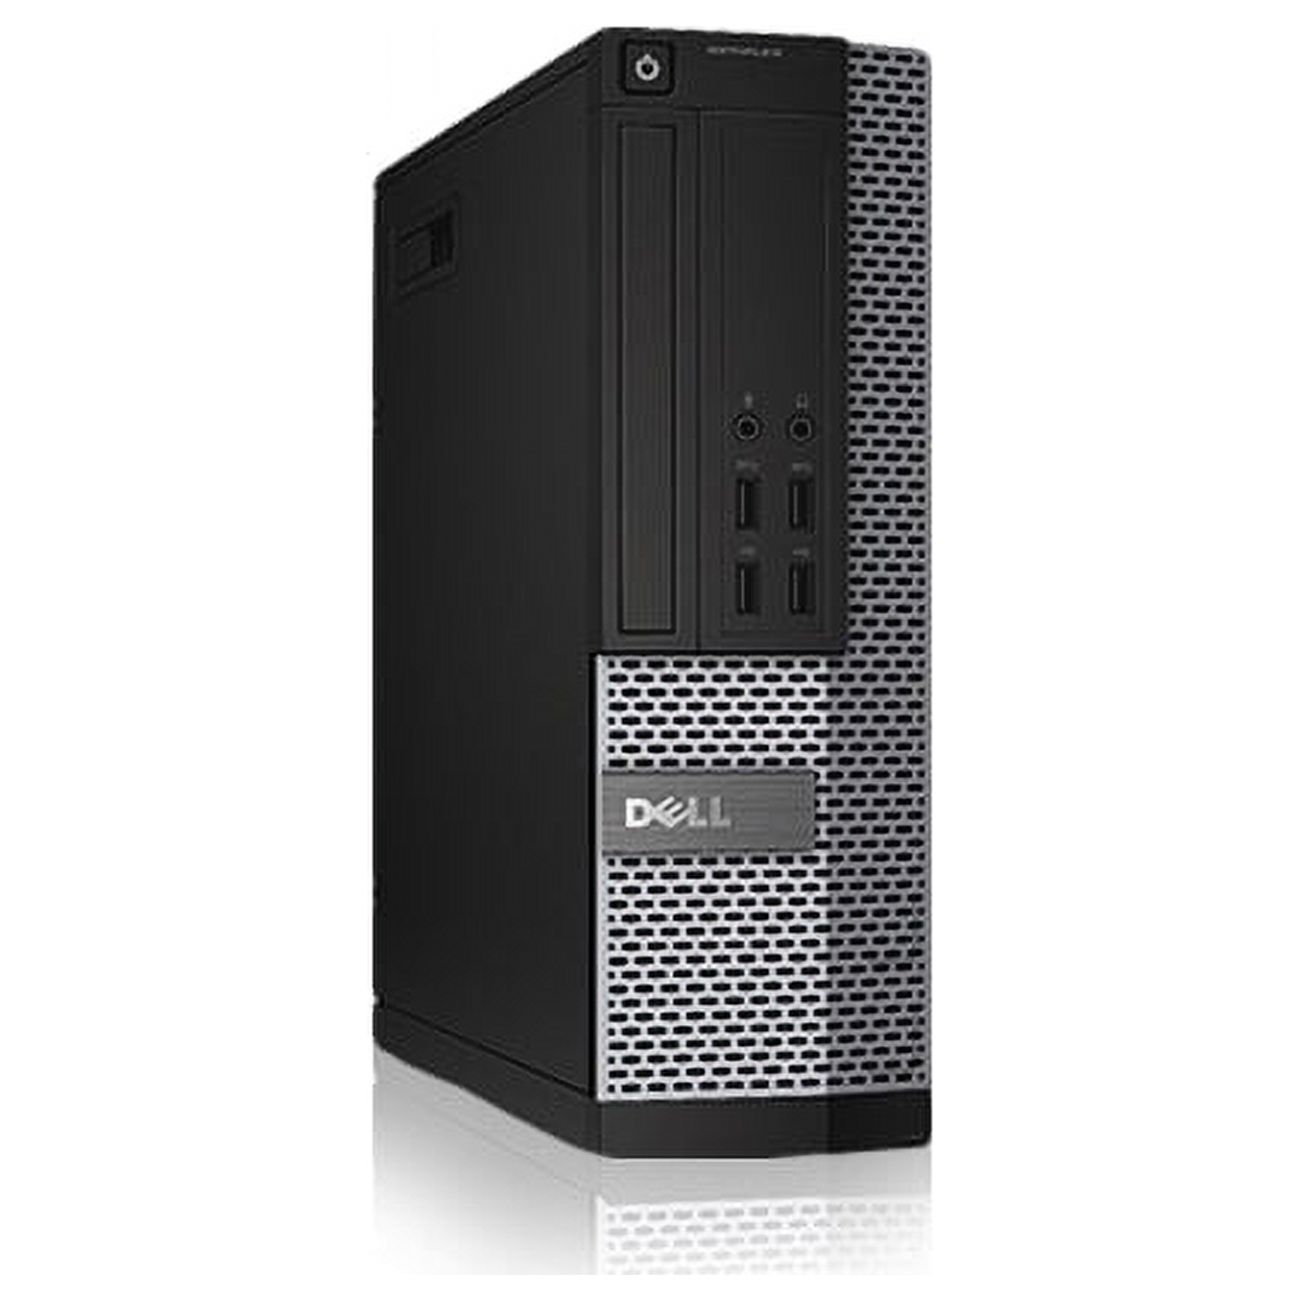 Restored Dell Optiplex Desktop Computer 2.8 GHz Core i7 Tower PC, 16GB, 2TB HDD, Windows 10 x64, 19" Dual Monitor , USB Mouse & Keyboard (Refurbished) - image 2 of 3